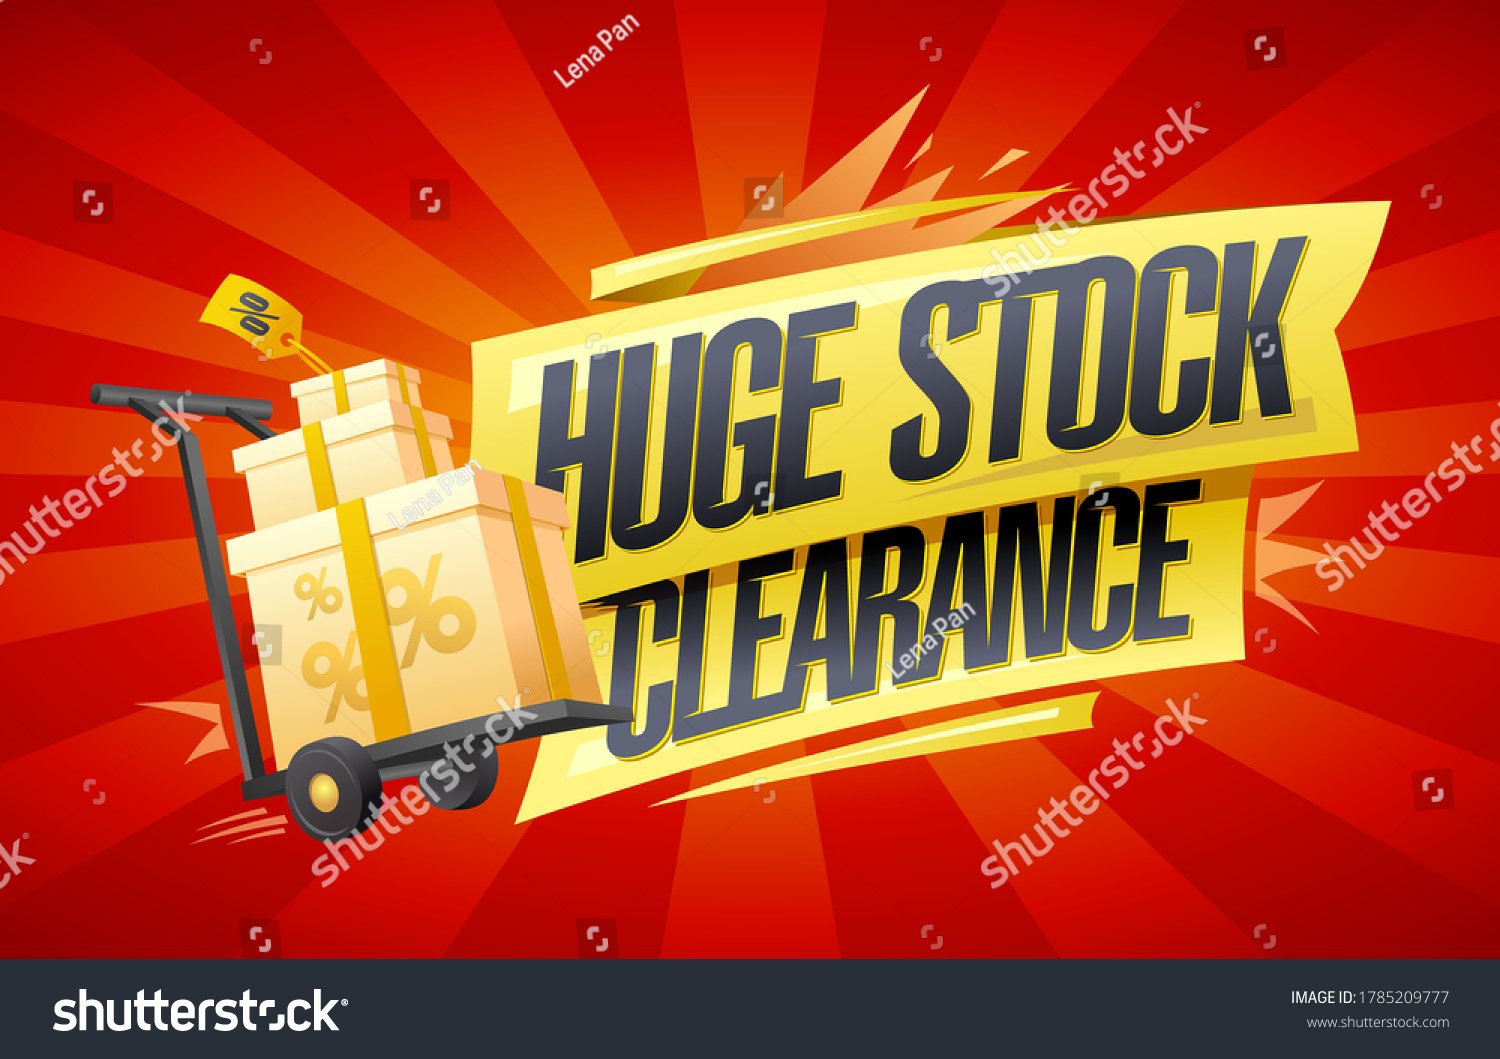 Huge stock clearance vector banner mockup with boxes on a shopping cart #1785209777